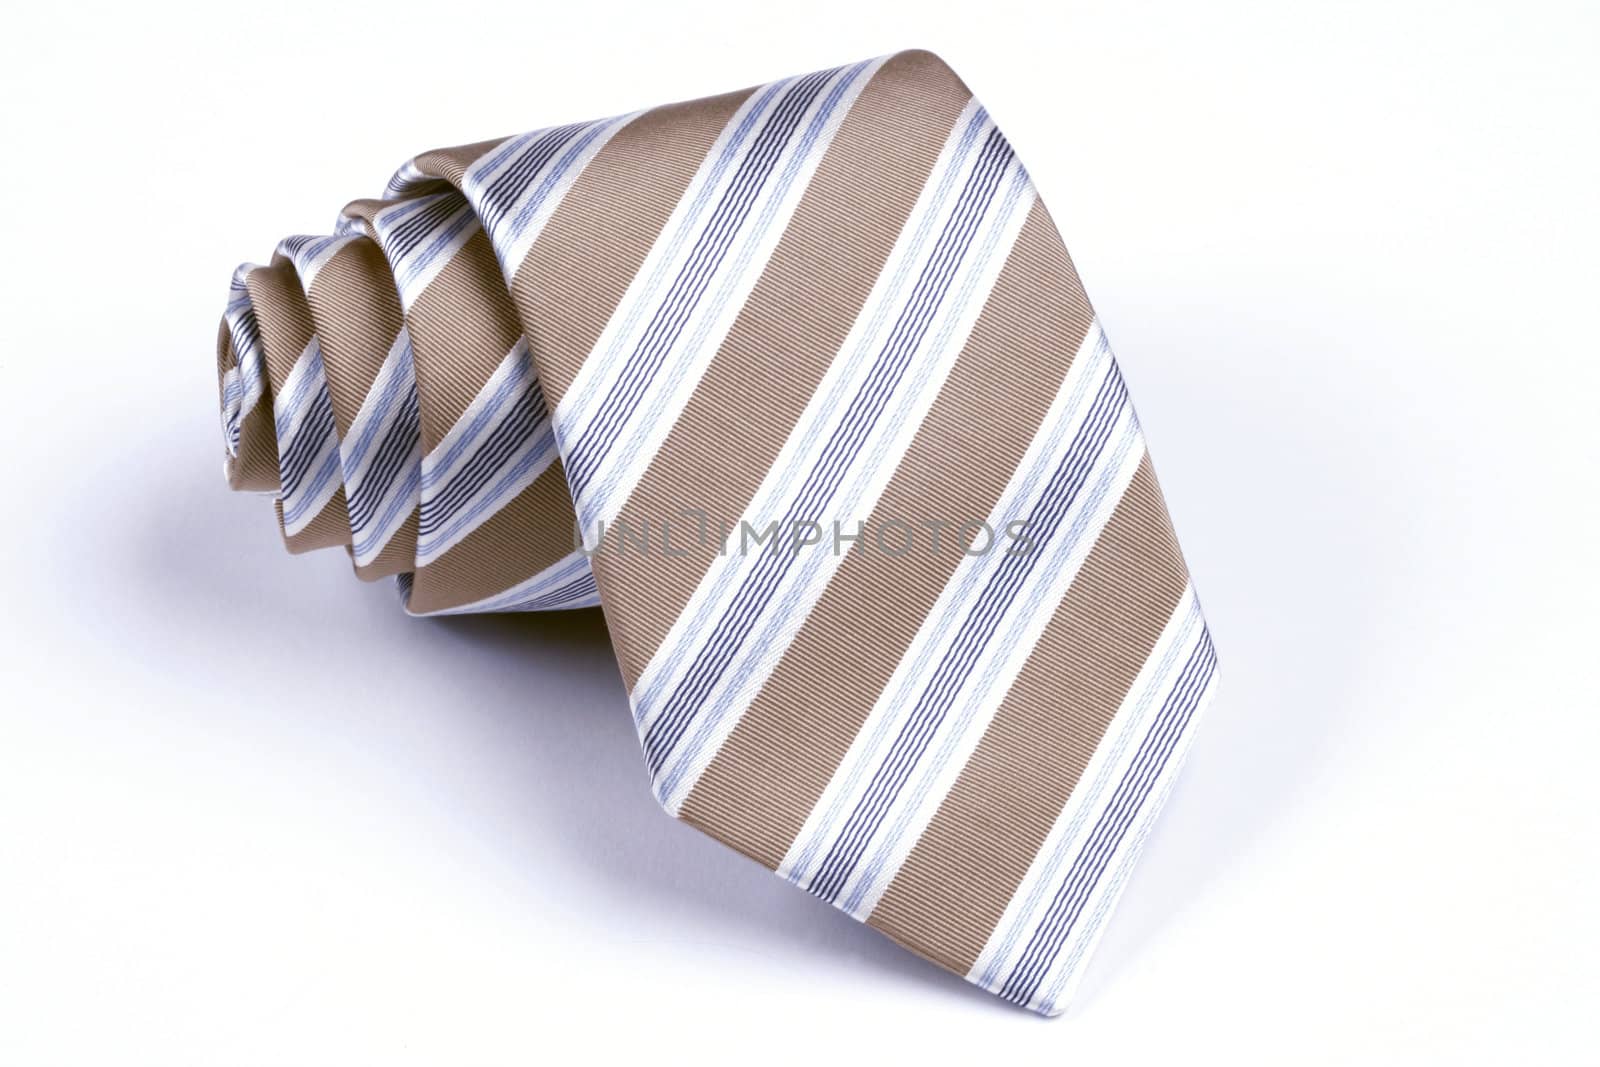 beige, blue and white striped necktie rolled up on white background